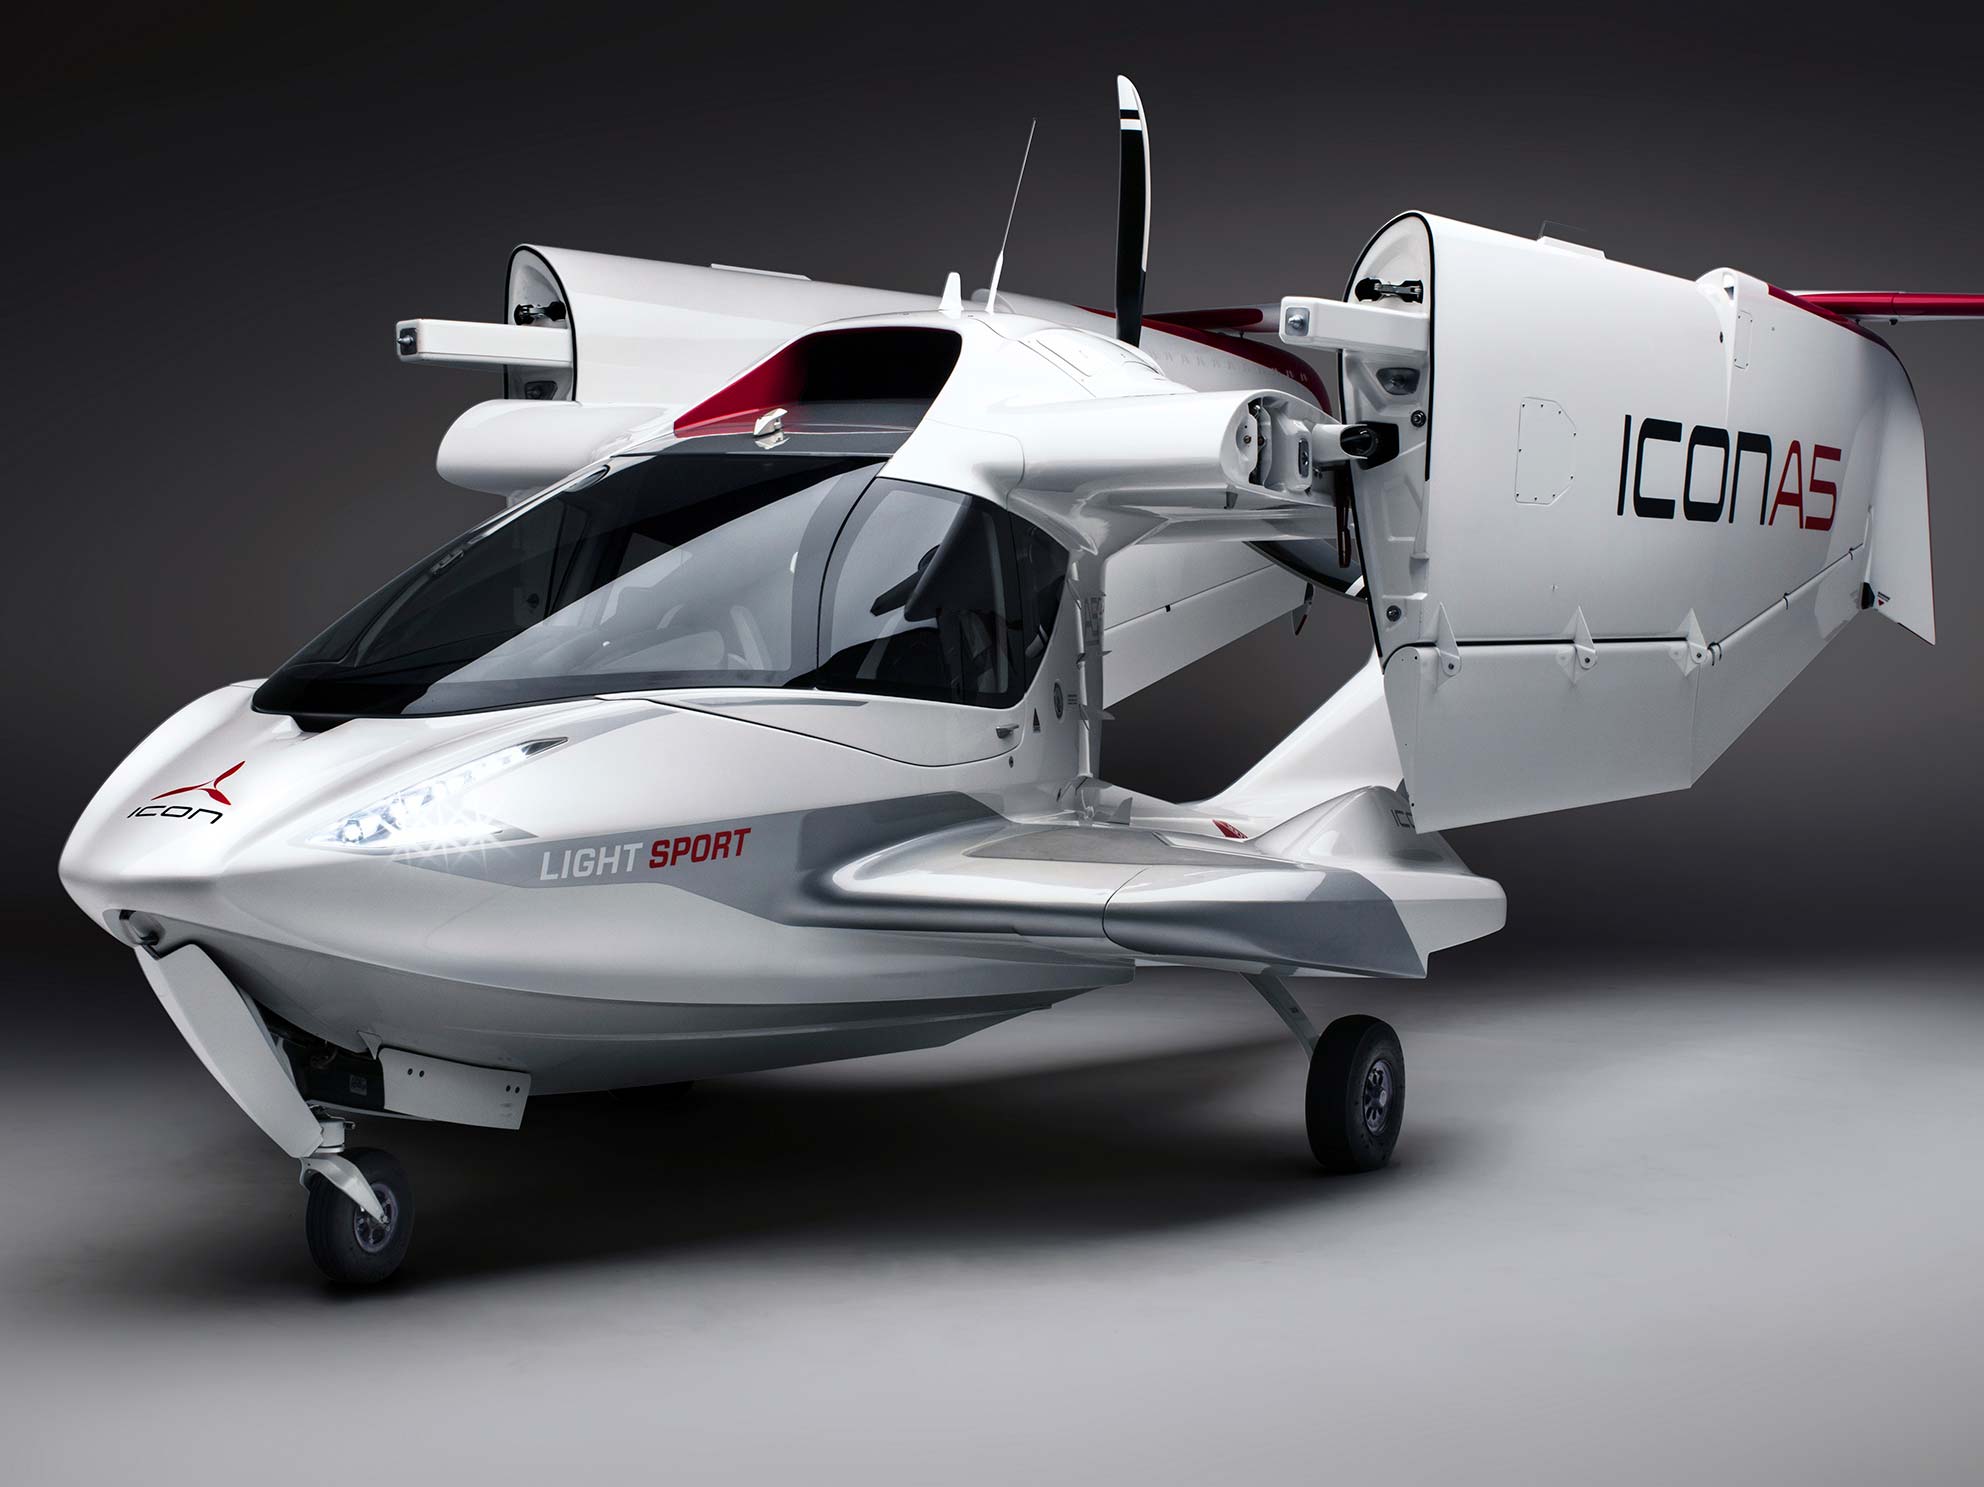 ICON A5 Specs | Learn more about the ICON A5 Light Sport Aircraft